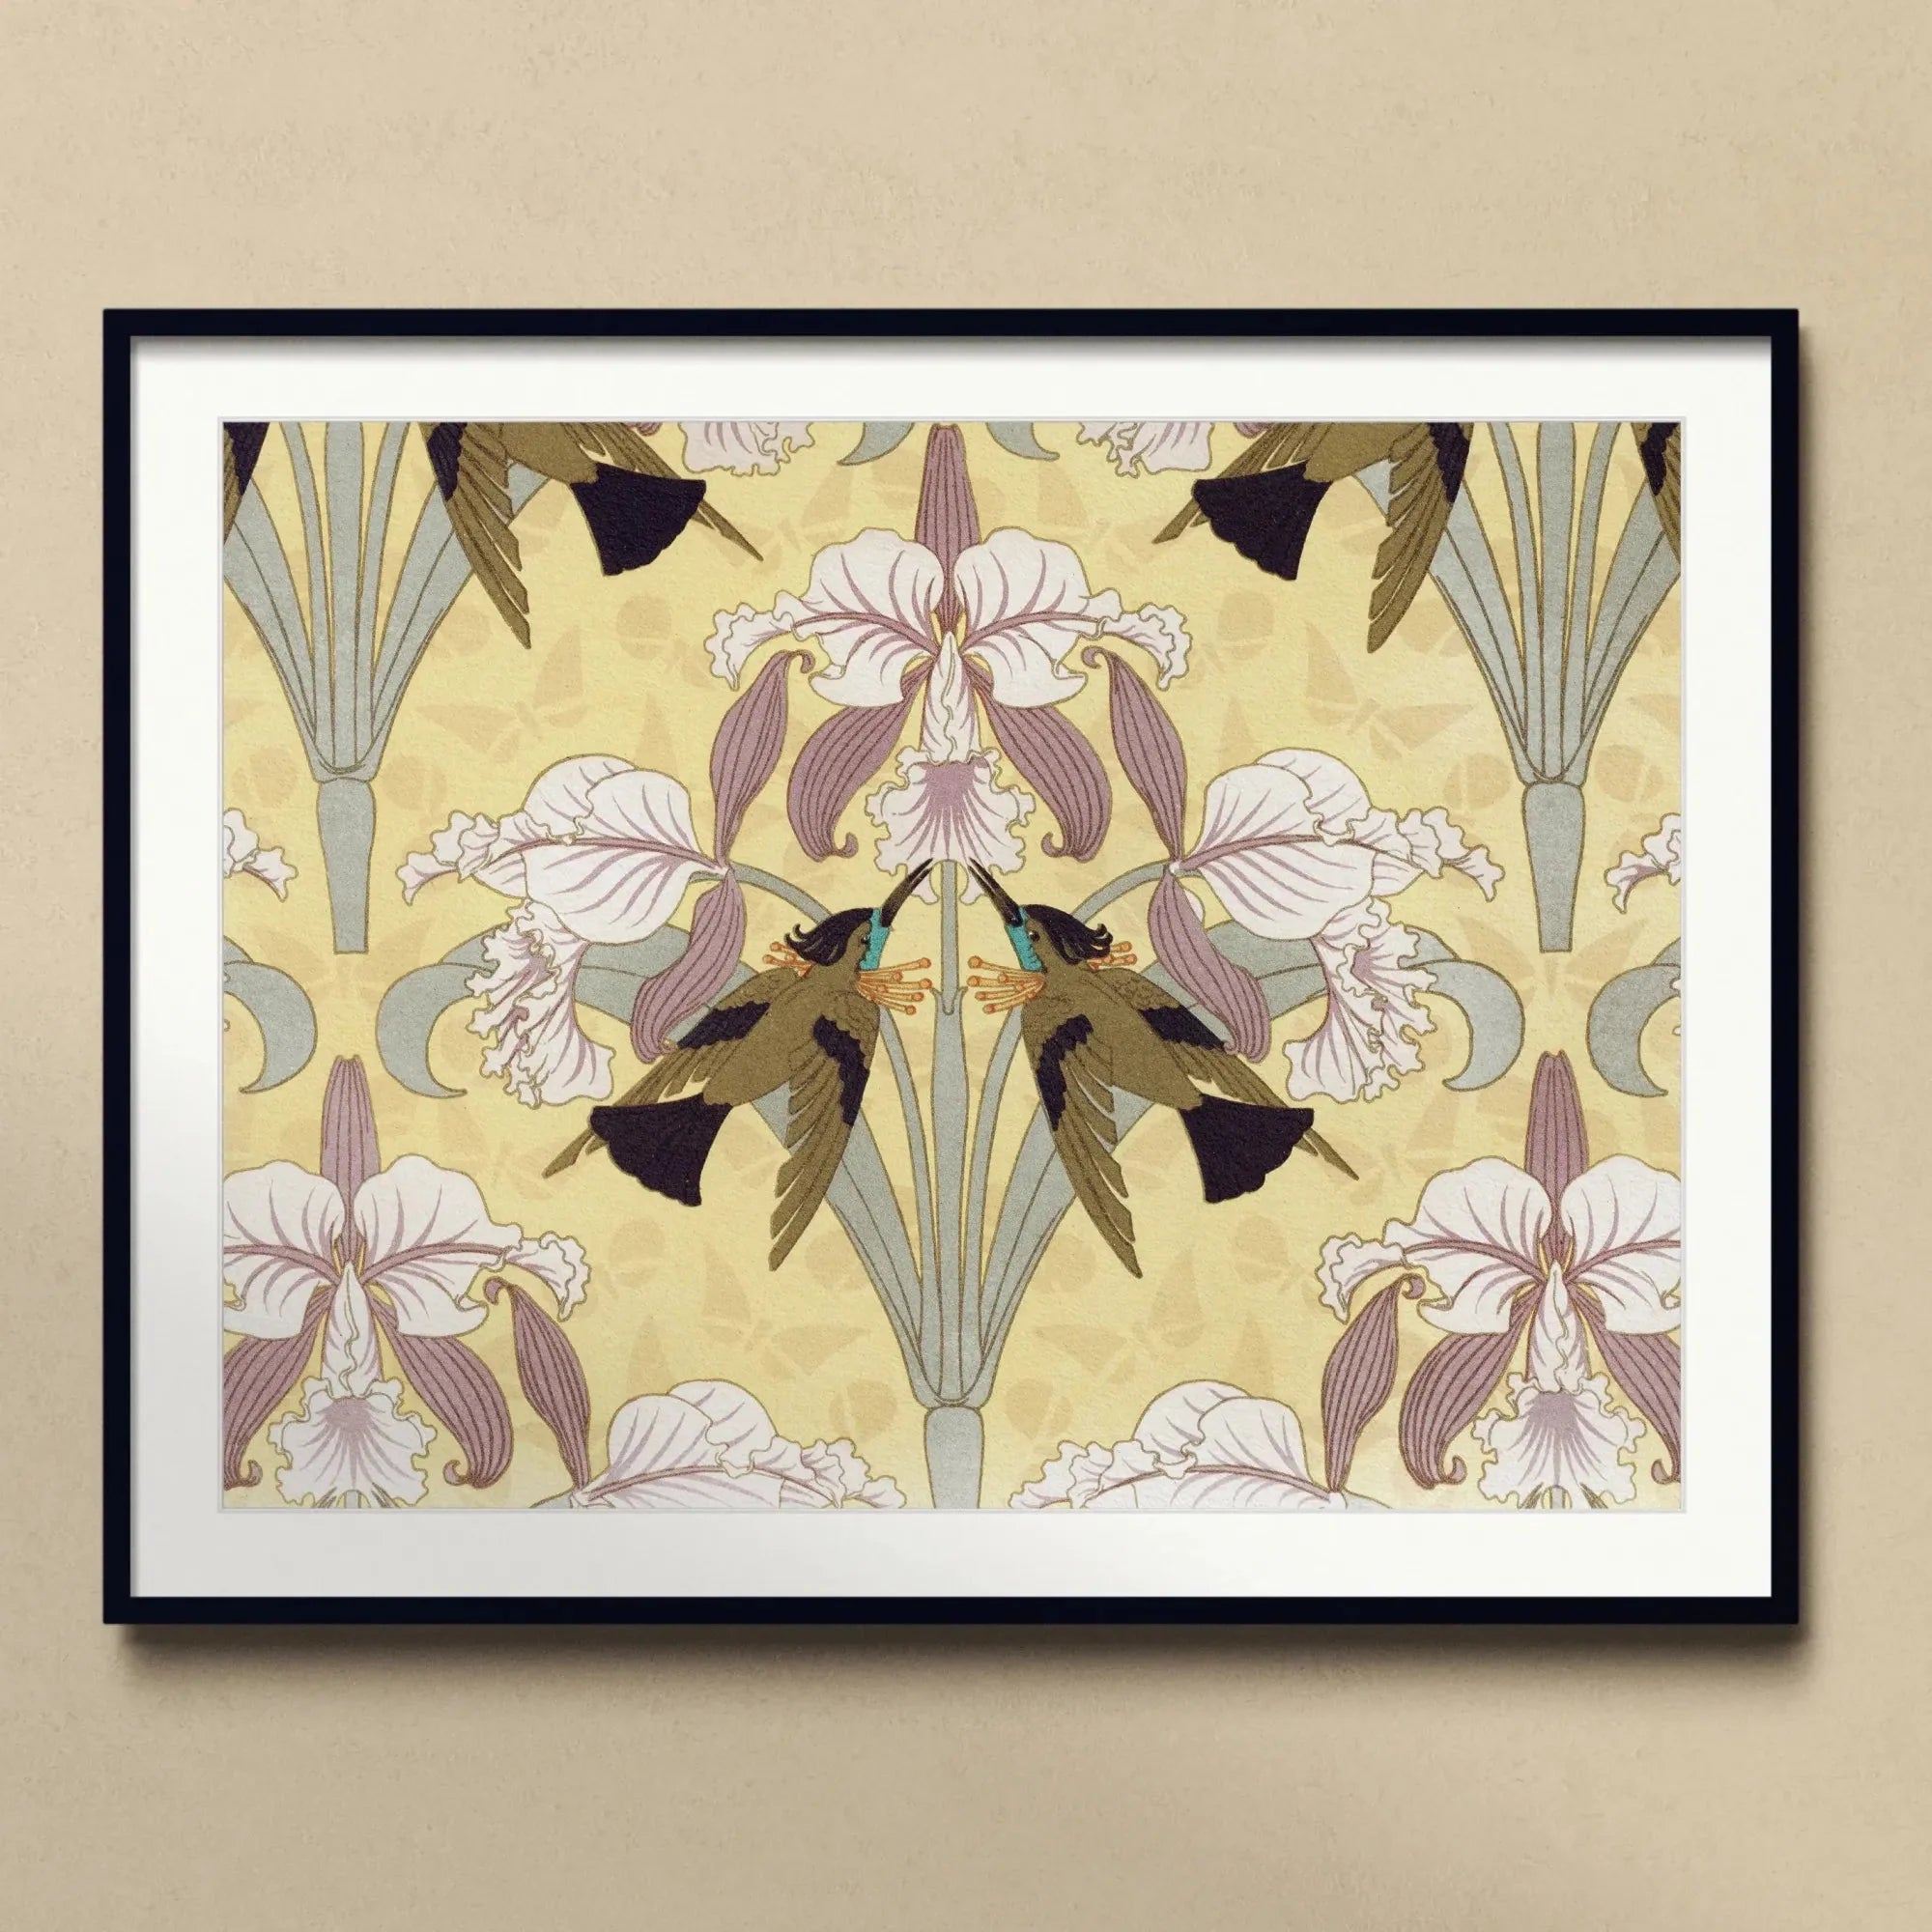 Oiseaux - mouches Et Orchidées By Maurice Pillard Verneuil Framed & Mounted Print - Posters Prints & Visual Artwork